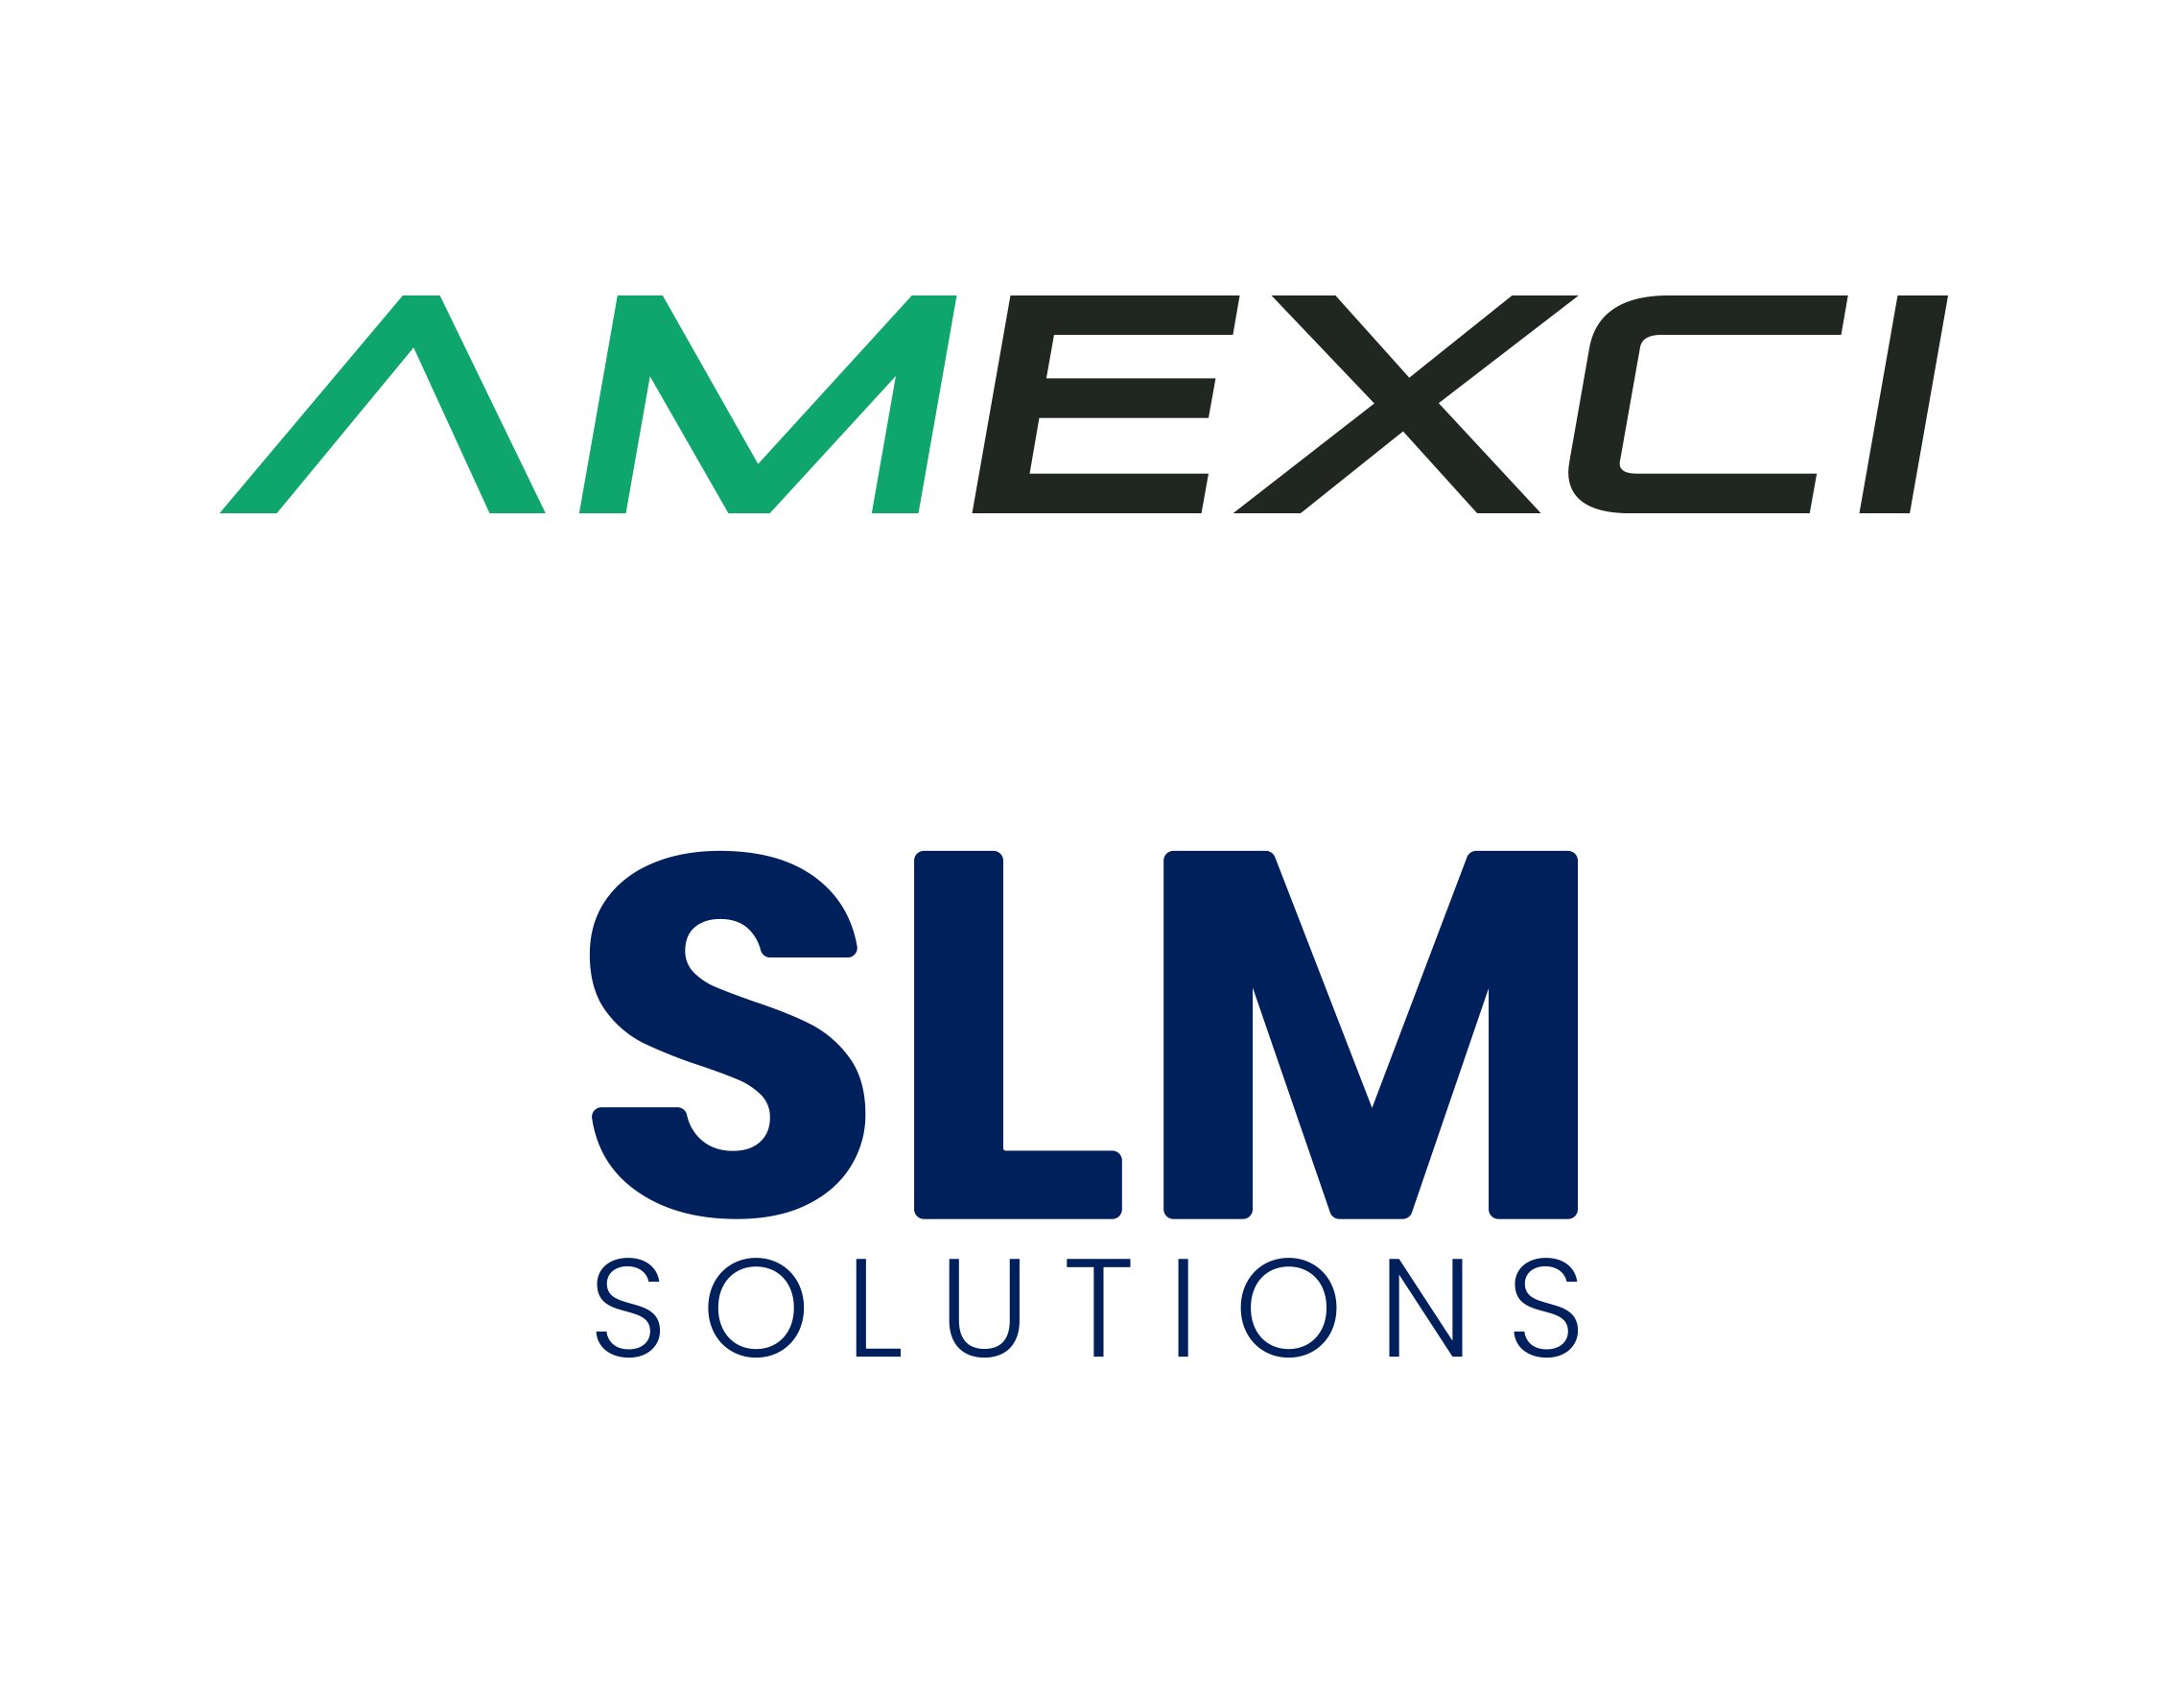 AMEXCI Acquires New 4-laser SLM®500 System from SLM Solutions